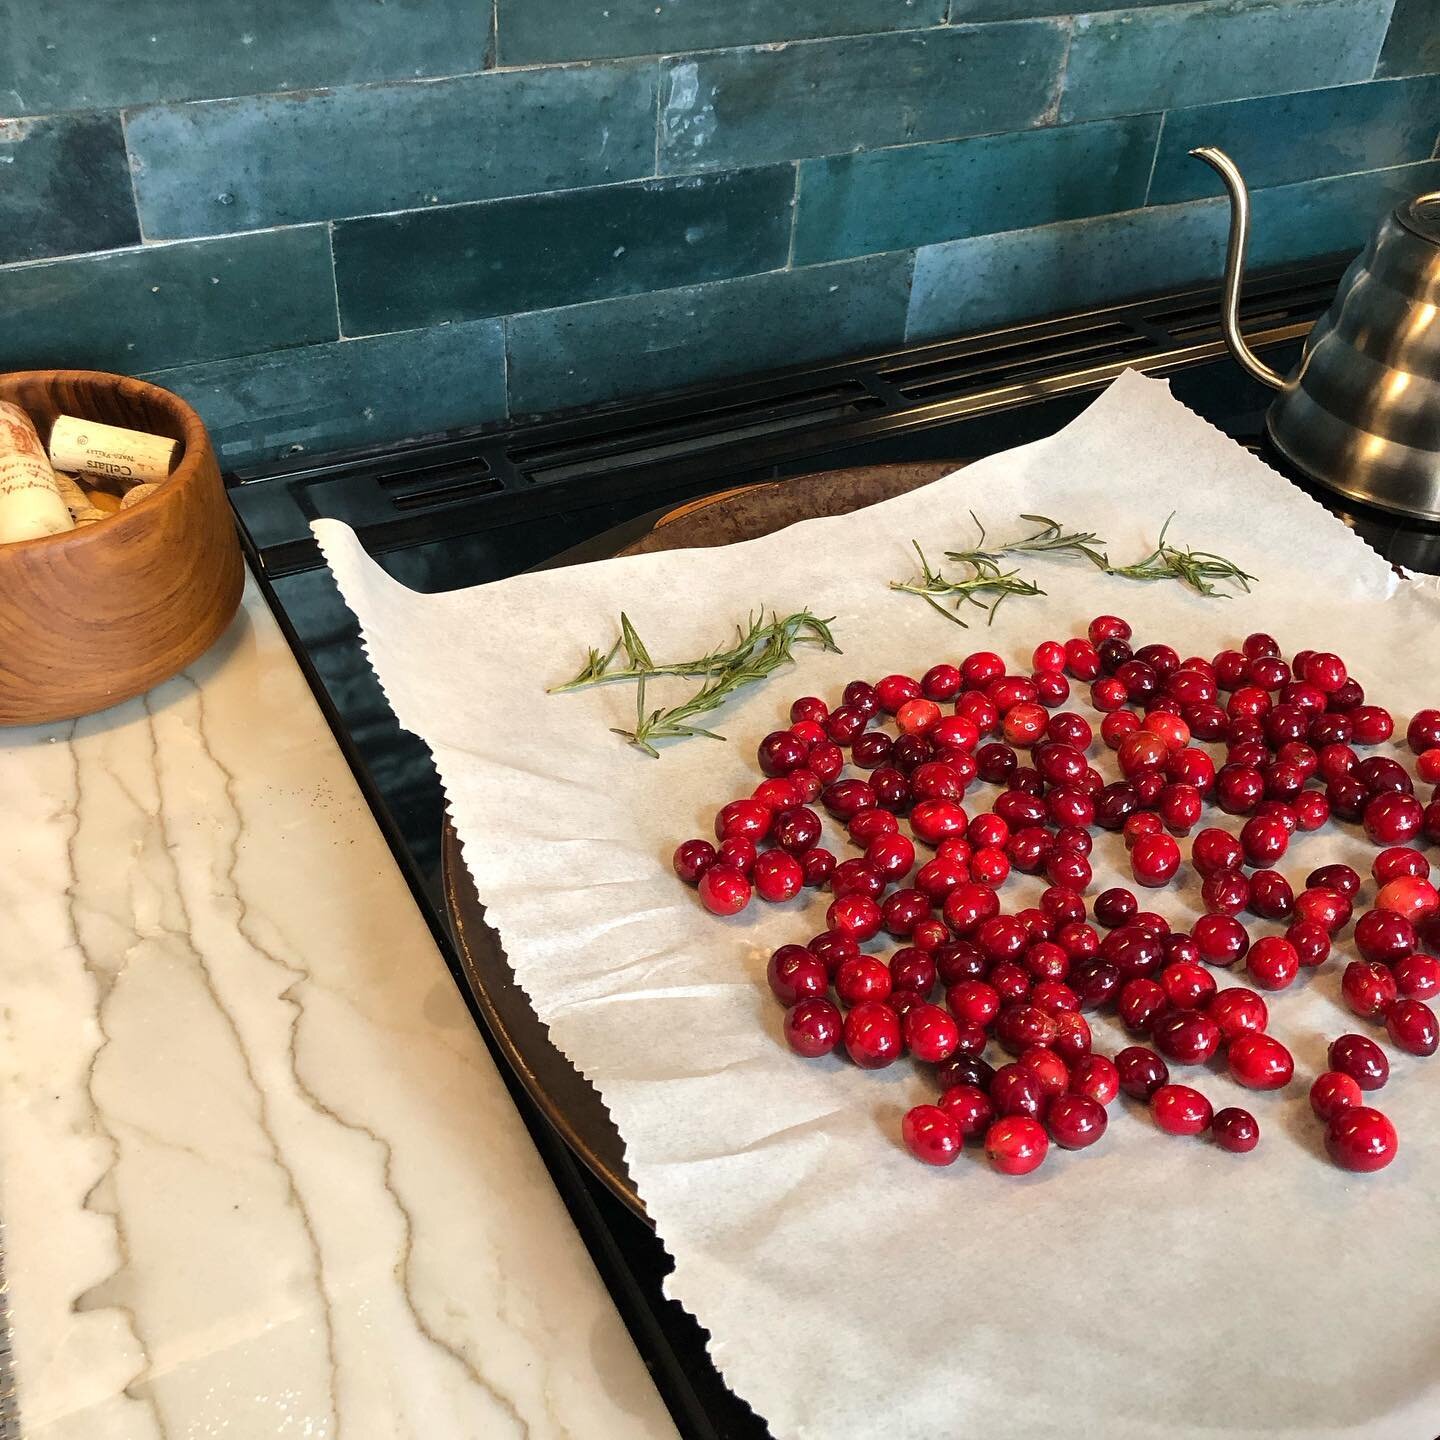 Cheers and Happy holidays! Making cranberry rosemary simple syrup and sugaring them for garnish. The house smells so good. 🥂🌲🍸🍾🌠

#kitchendesign #tiledesign #quartzite #naturalstone #handmadetile #bluetile #happyholidays #christmascocktail #fest